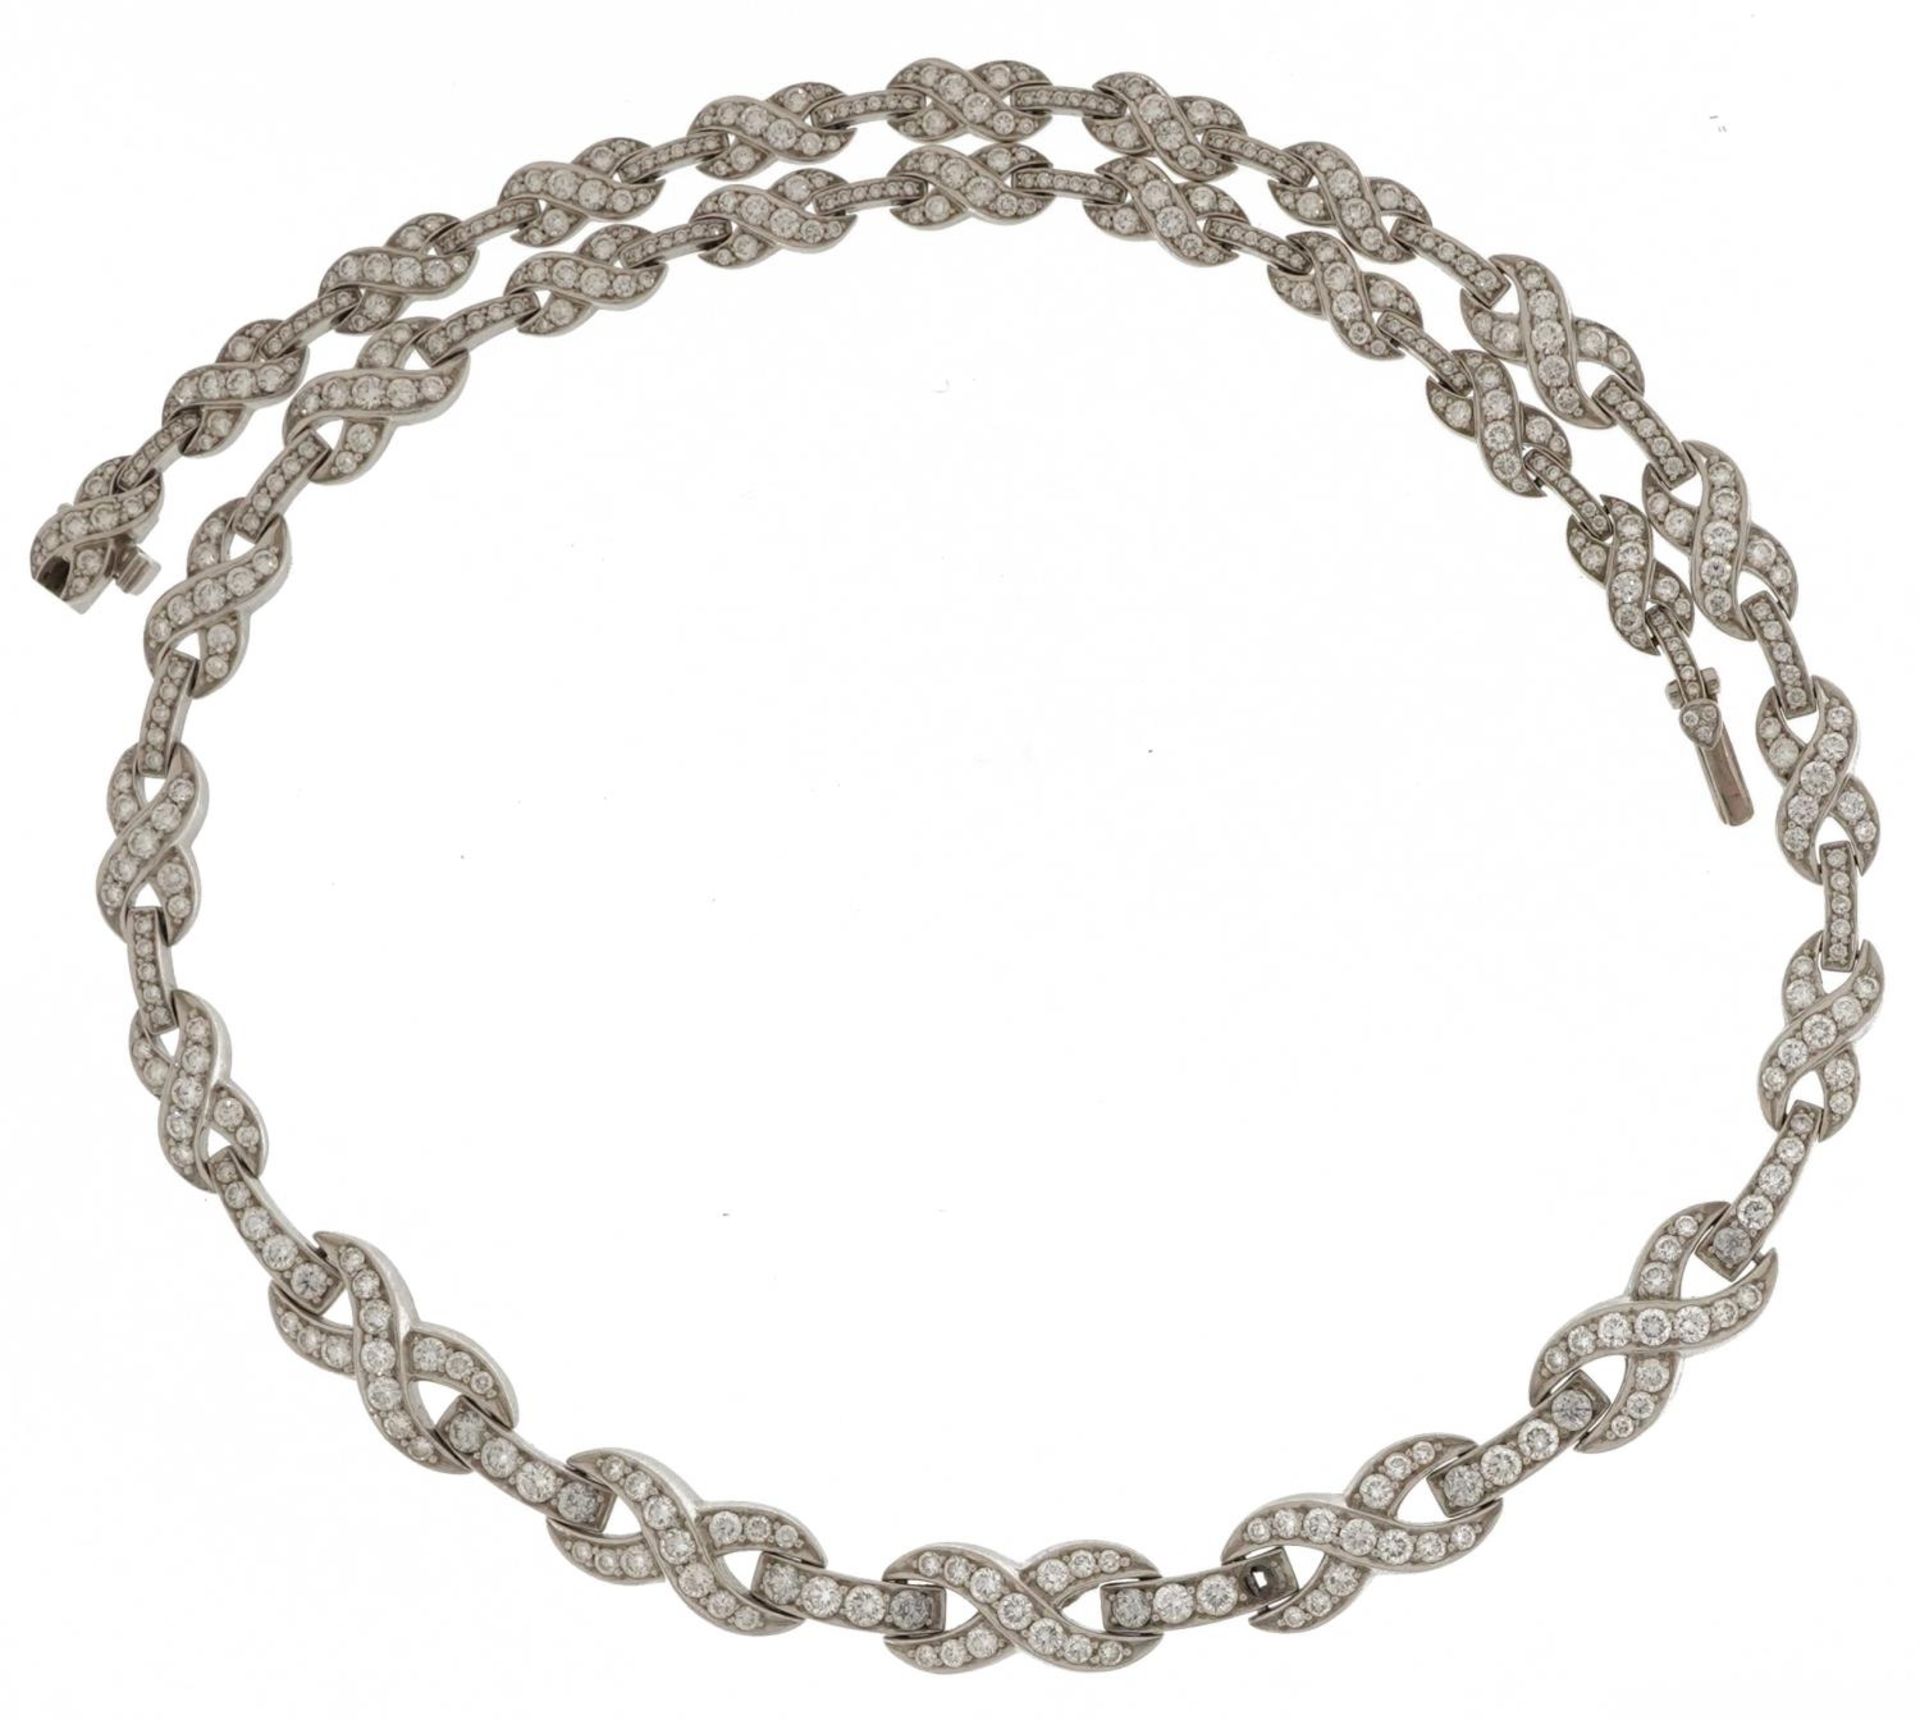 Good platinum diamond infinity link necklace, the largest diamonds approximately 2.10mm in diameter, - Image 2 of 4